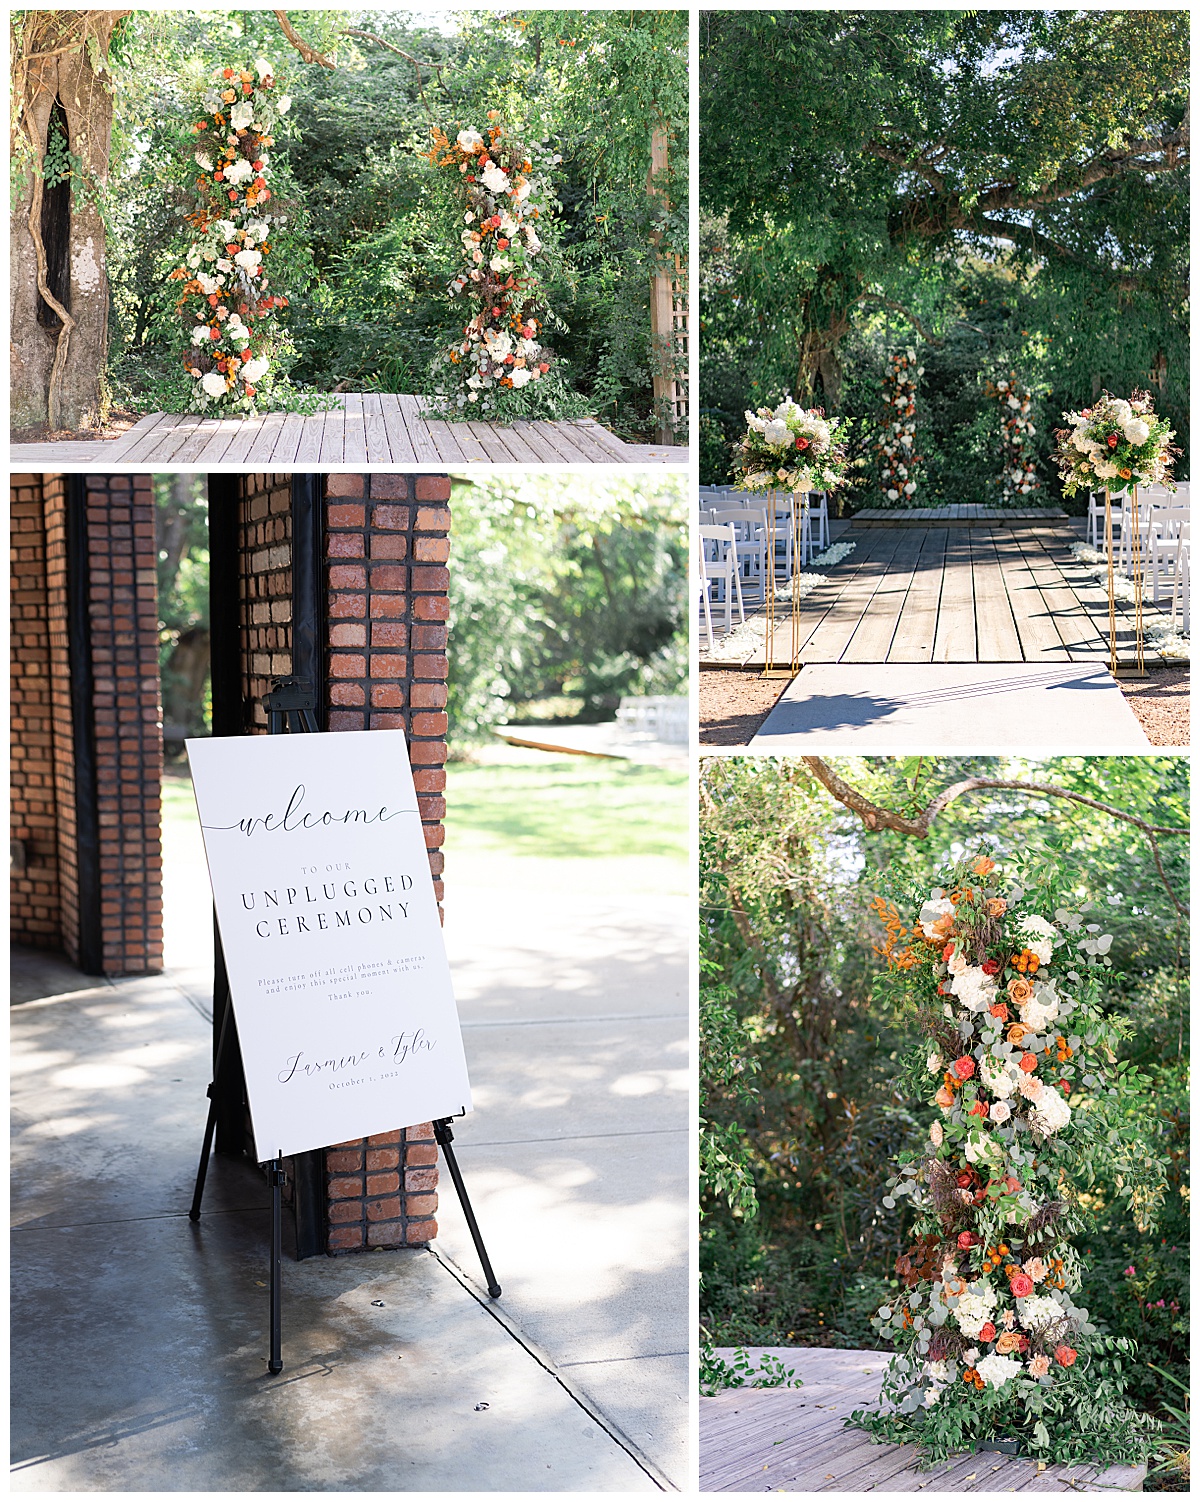 Beautiful ceremony decor at The Bowery House & Gardens